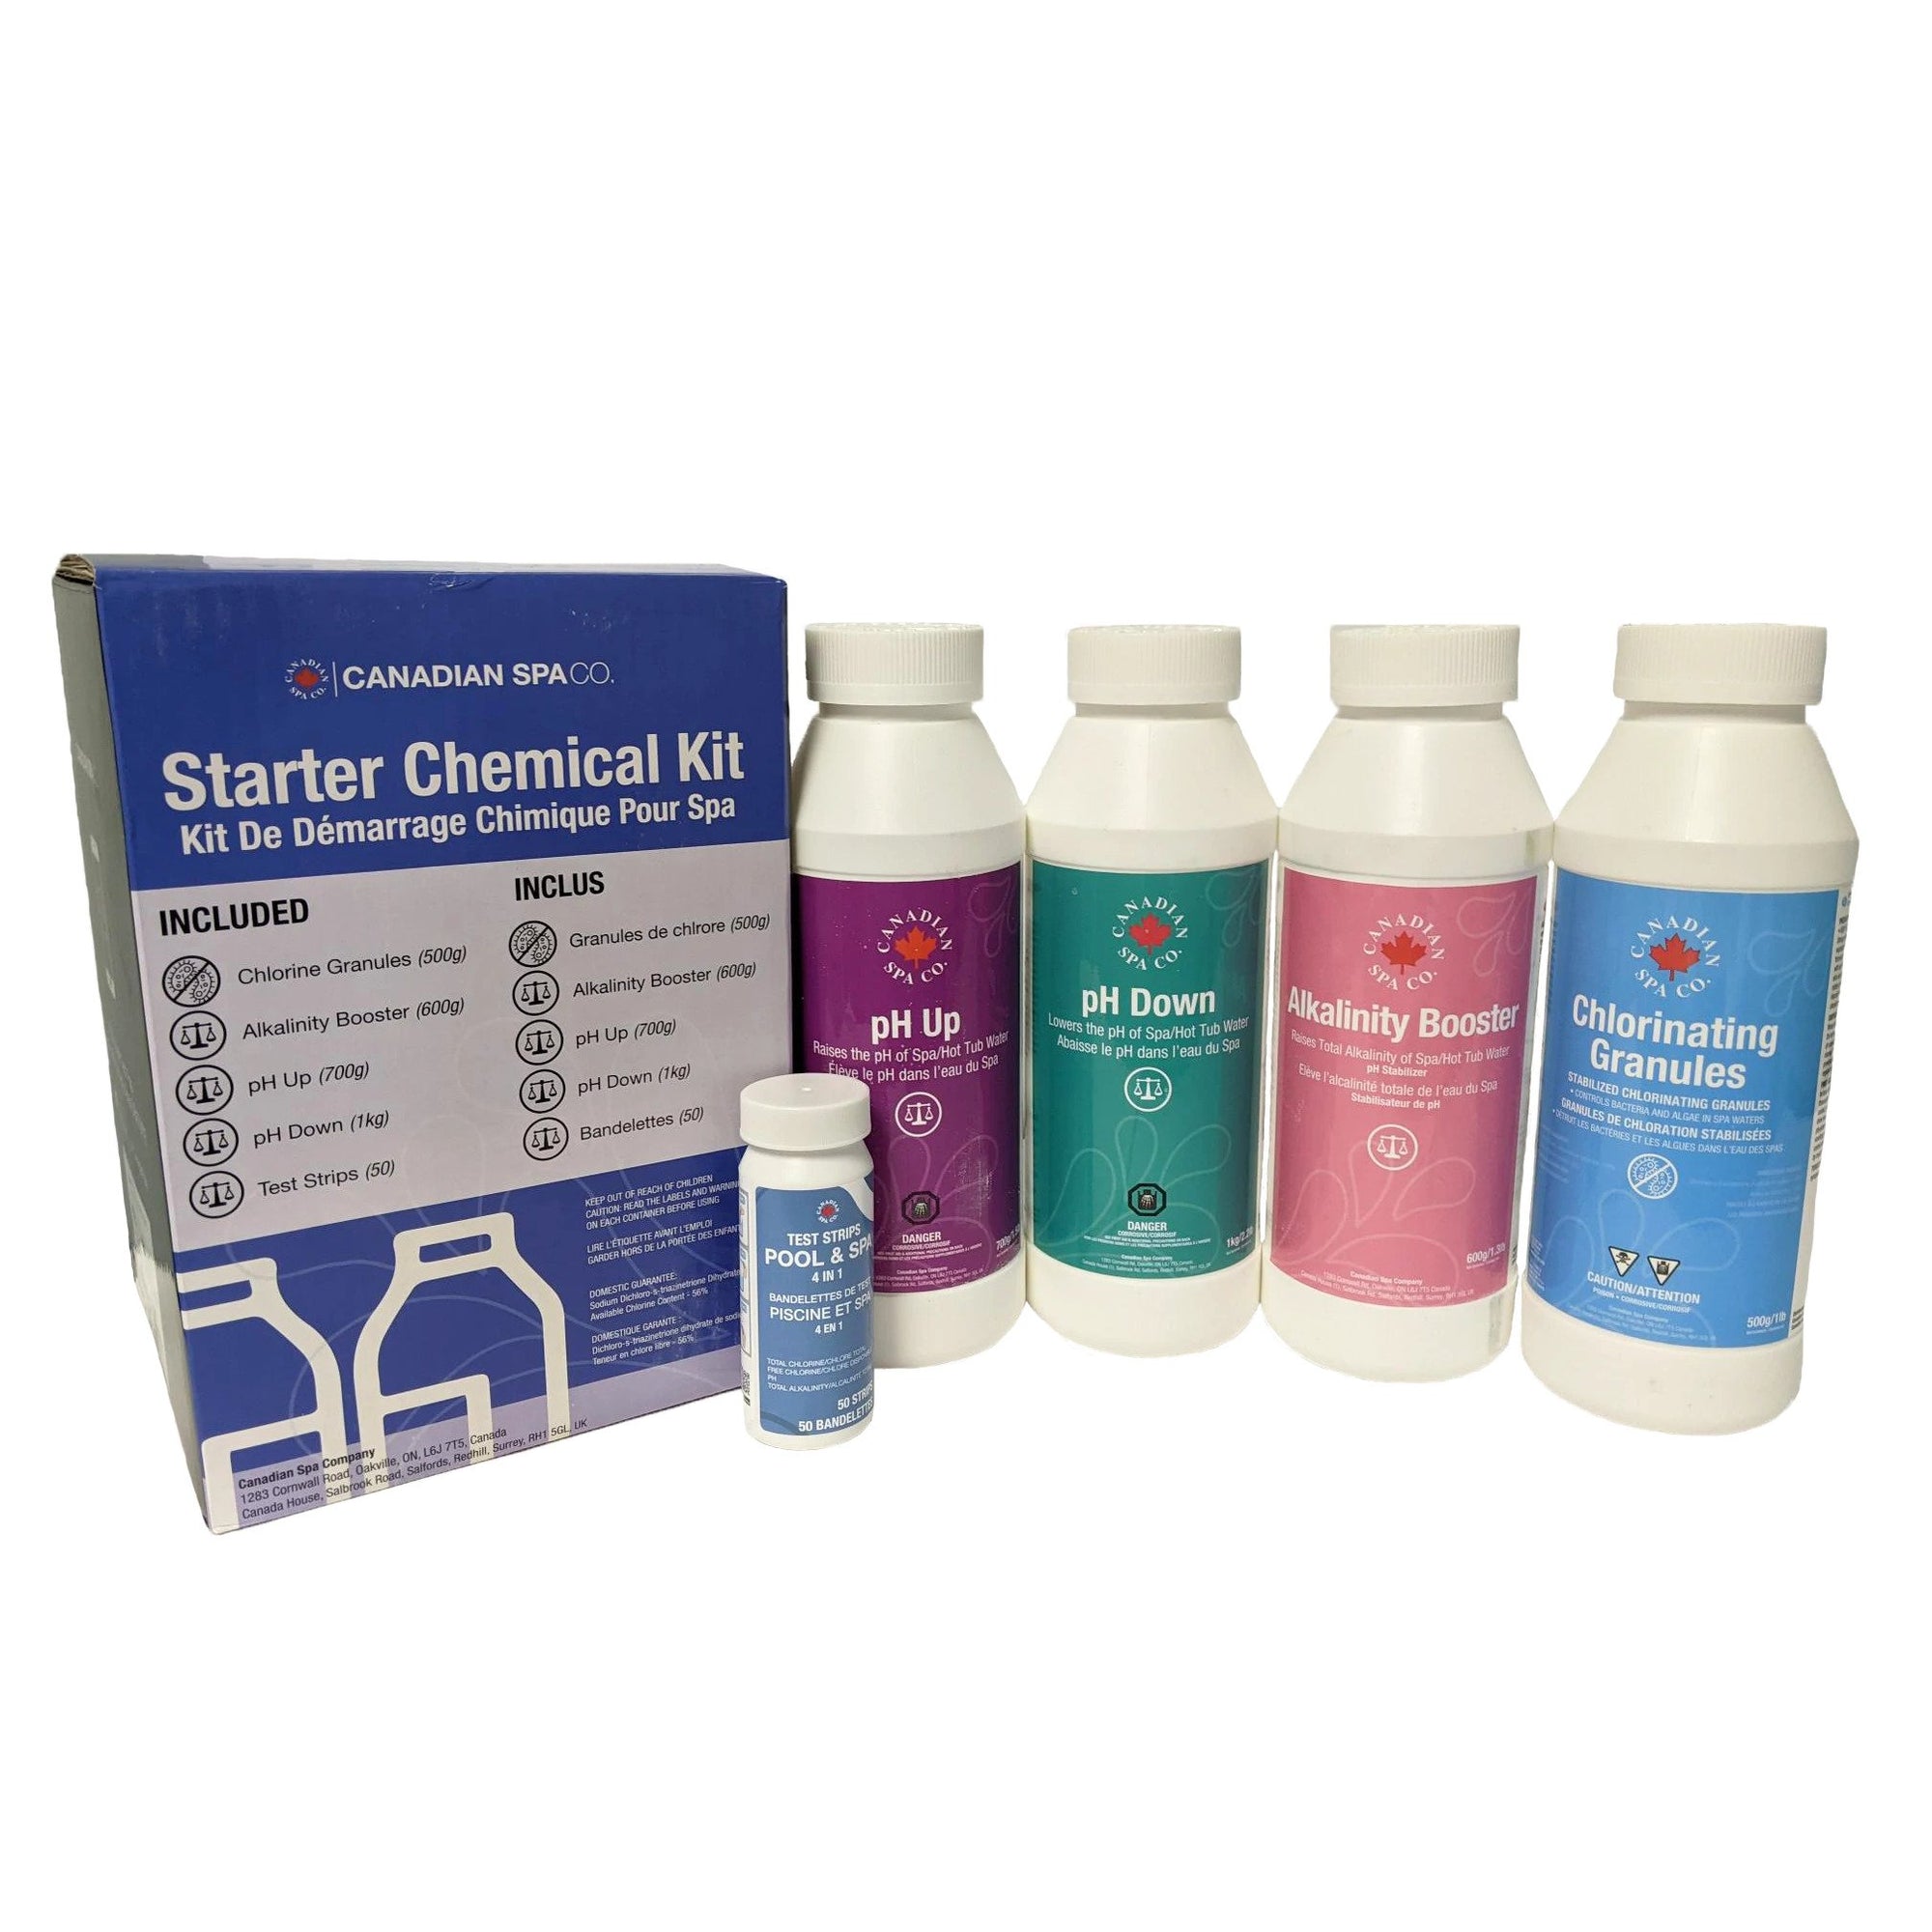 Canadian Spa Starter Chemical Kit - Includes: Chlorine Granules, Foam Free, pH Up, pH Down, Test Strips - FREE with code STARTFORFREE - KA-10126  - Vital Hydrotherapy